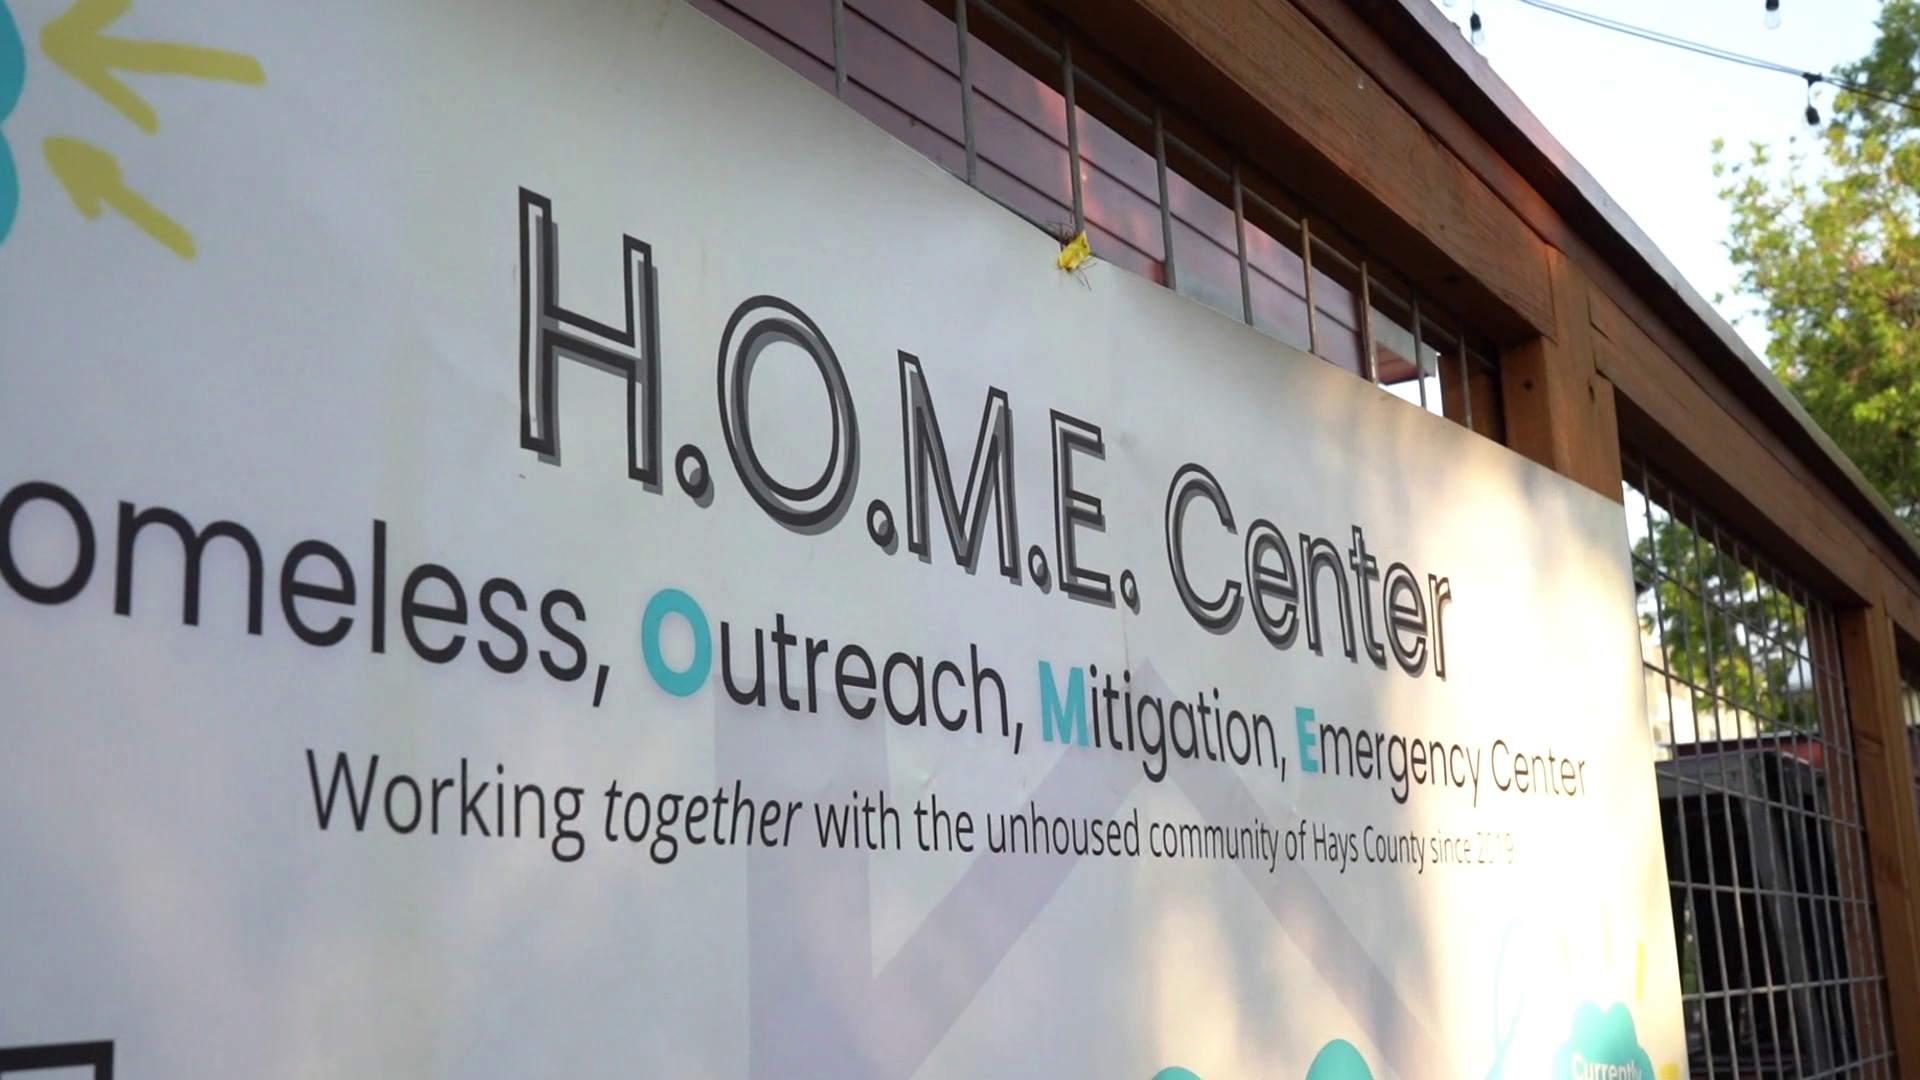 The H.O.M.E. Center in San Marcos helps homeless veterans get into permanent housing and mental health services, among other resources.